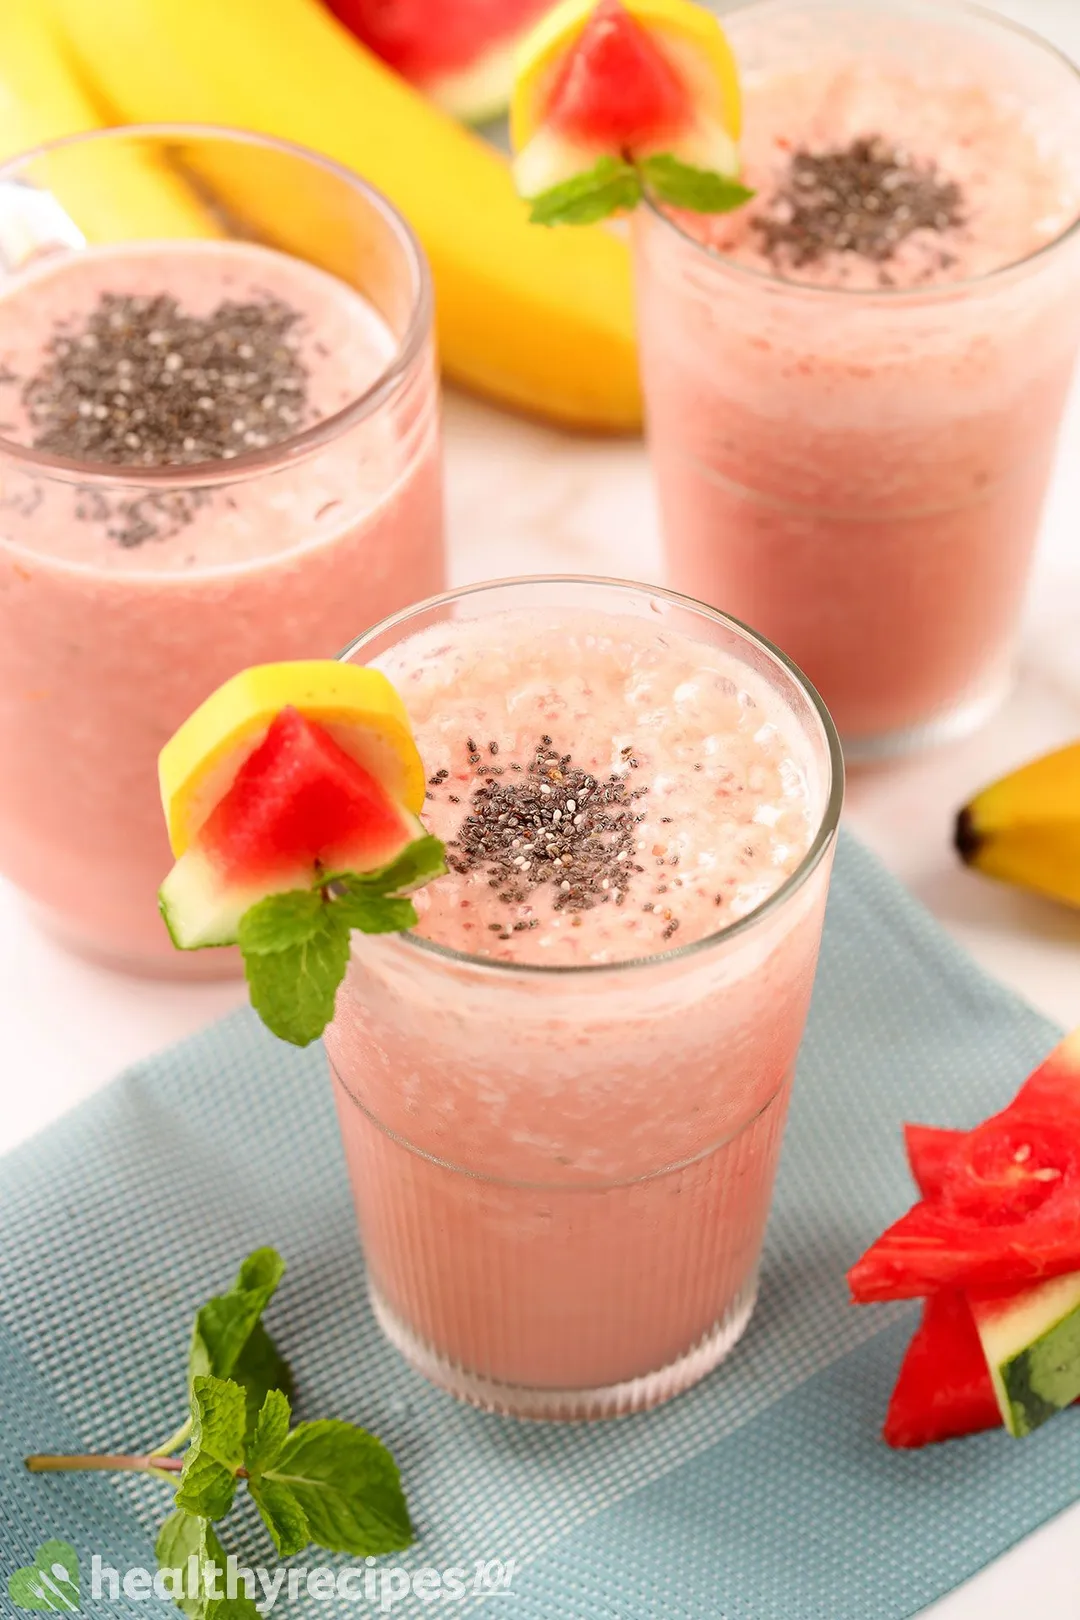 Three glasses of Watermelon Banana Smoothie placed near mint leaves, bananas, and watermelon slices.